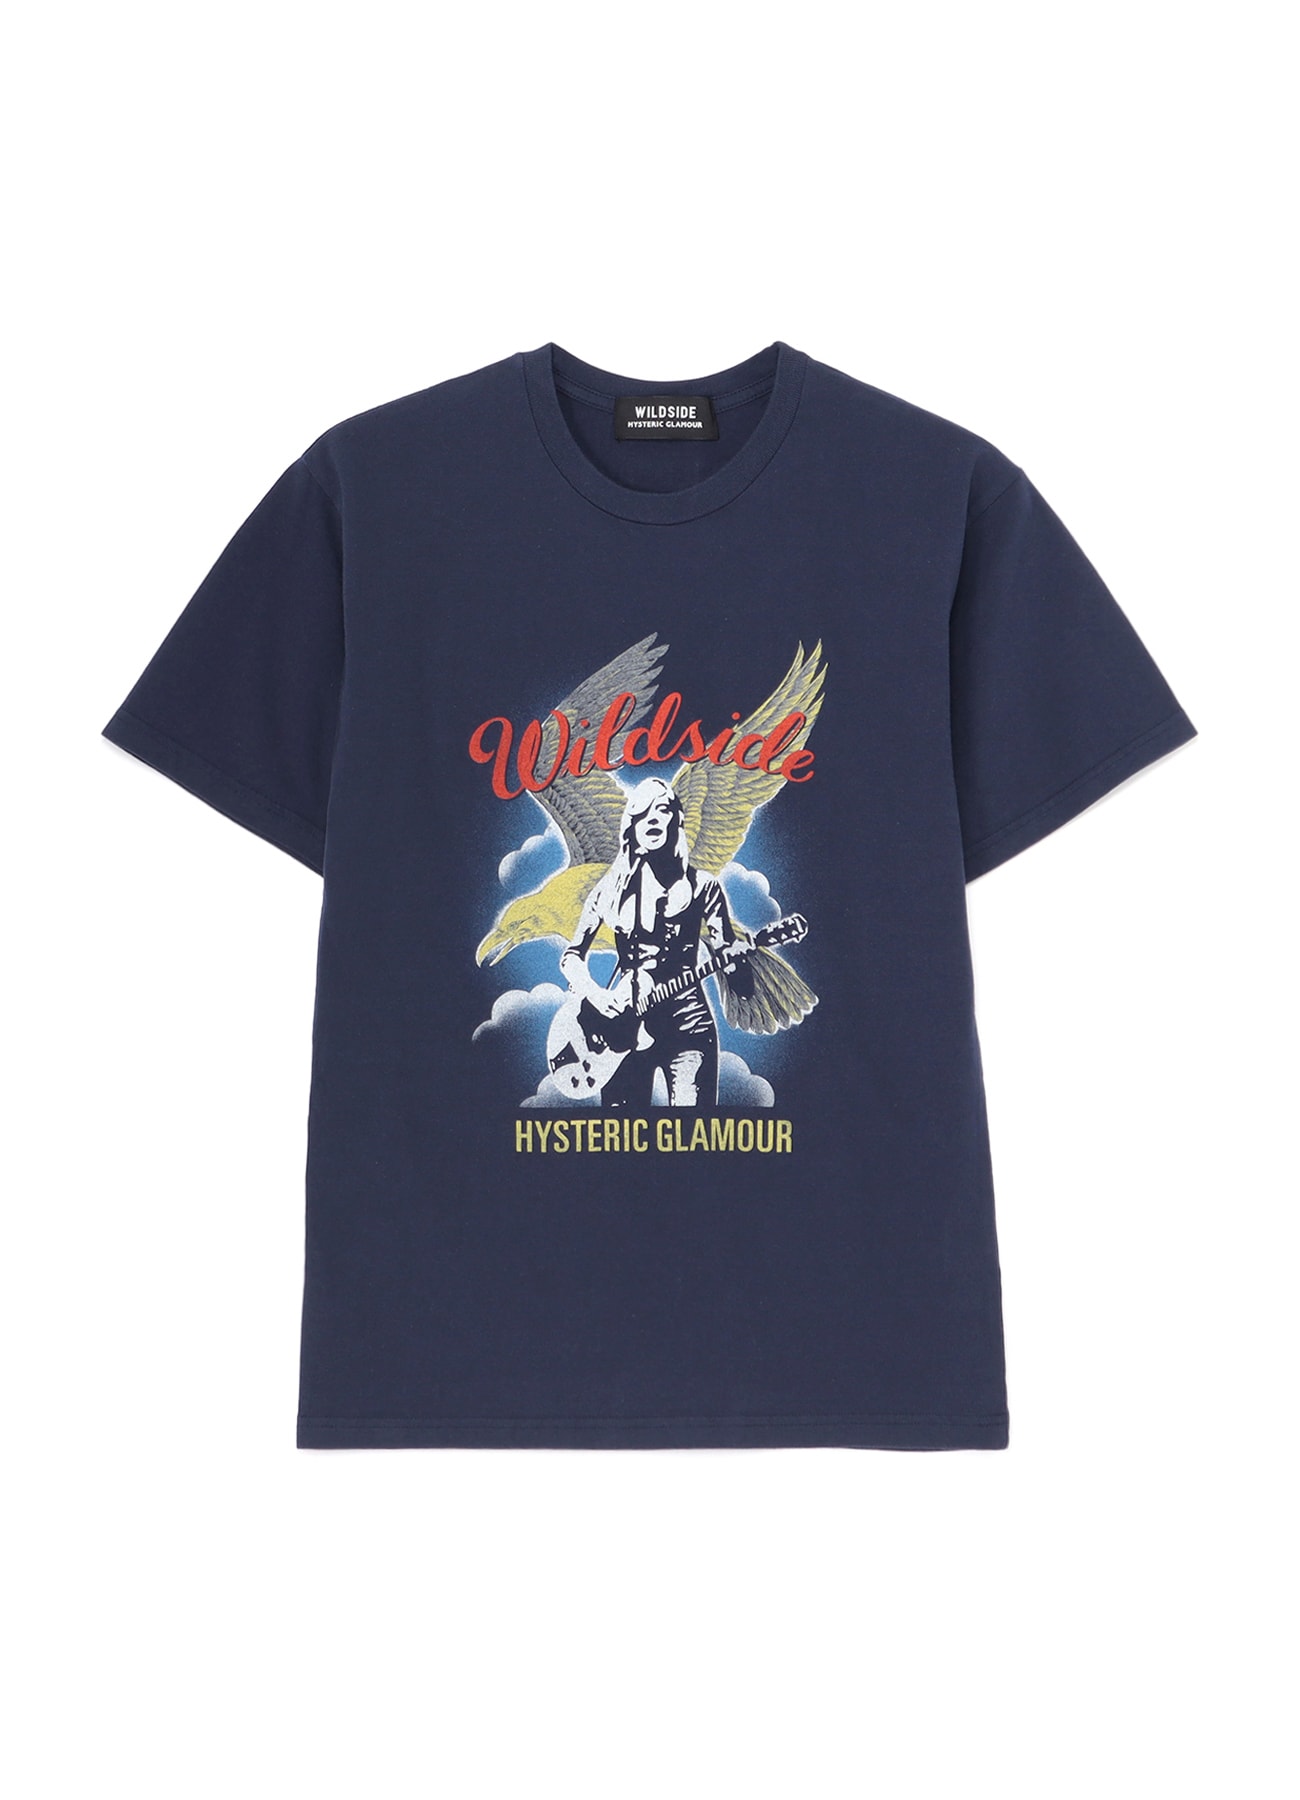 WILDSIDE × HYSTERIC GLAMOUR T-Shirt(S NAVY): HYSTERIC GLAMOUR